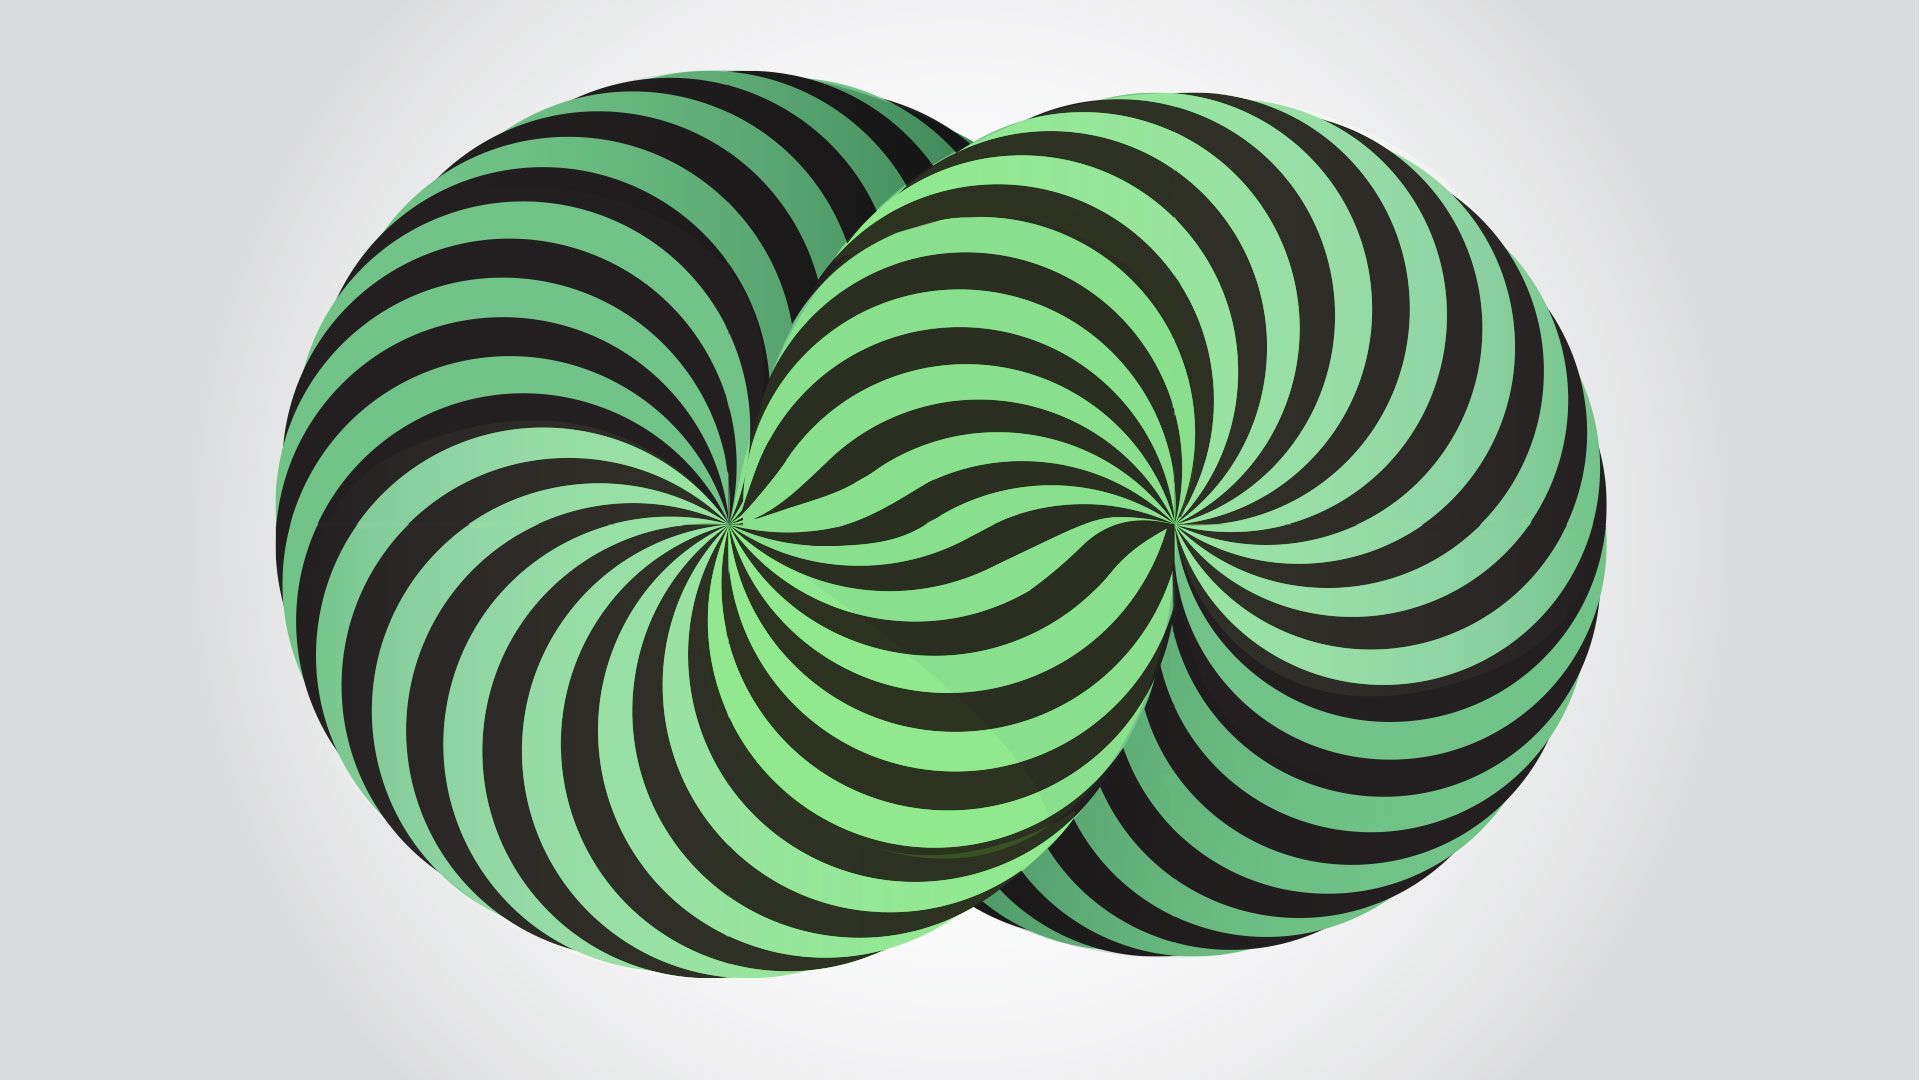 Illustration of two intersecting spiral shapes in green and black optical illusion lines. 